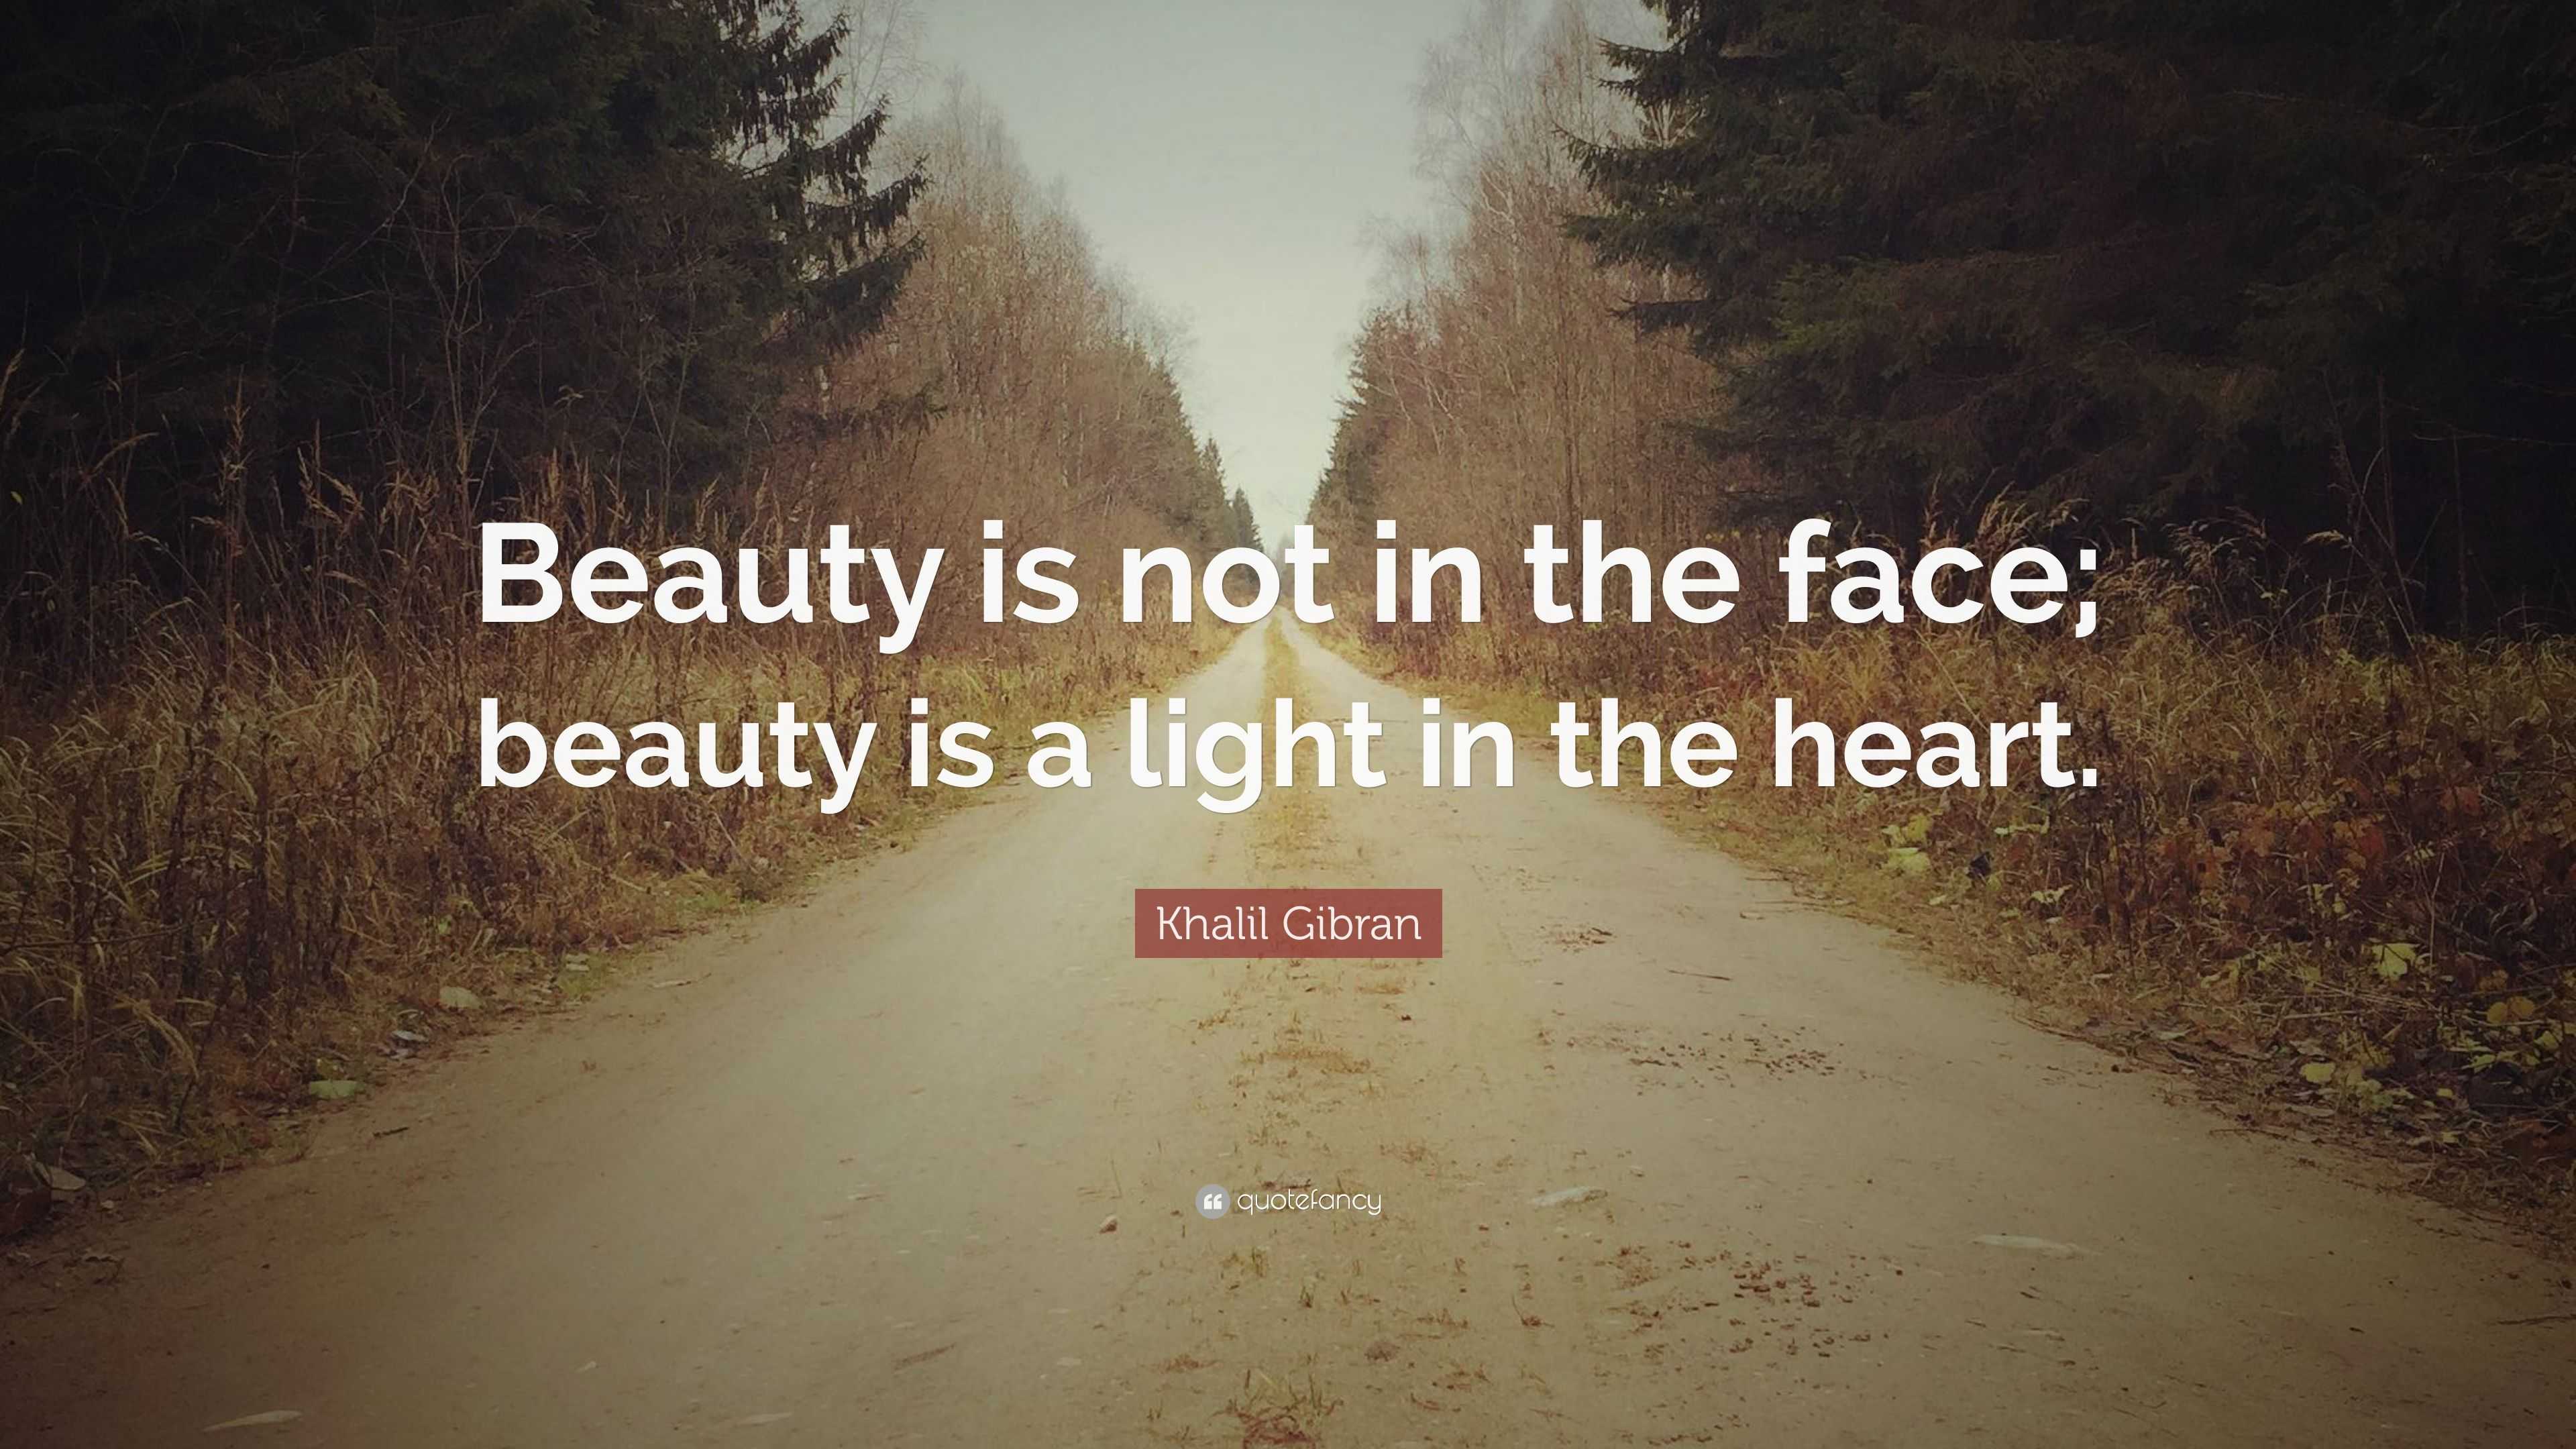 face beauty is not important quotes